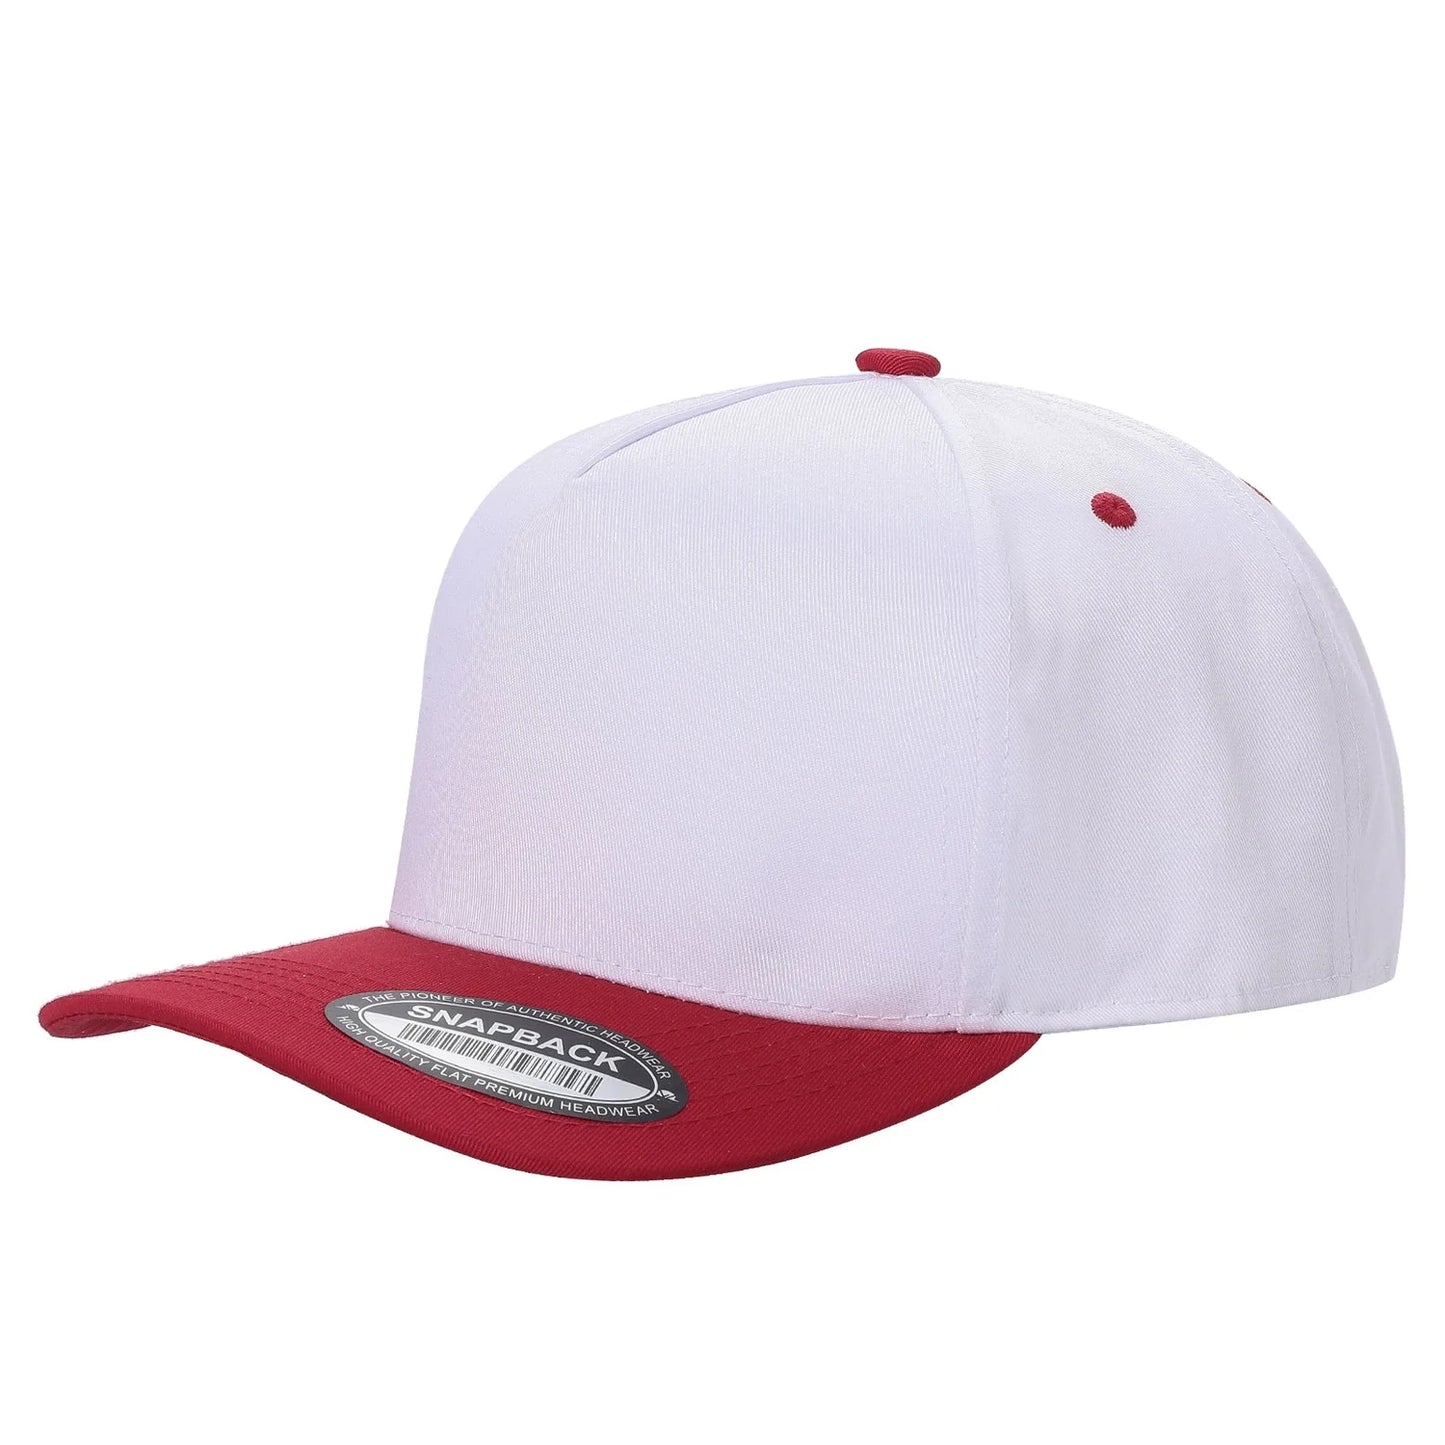 Hat Bar: Two-Tone Pro Style